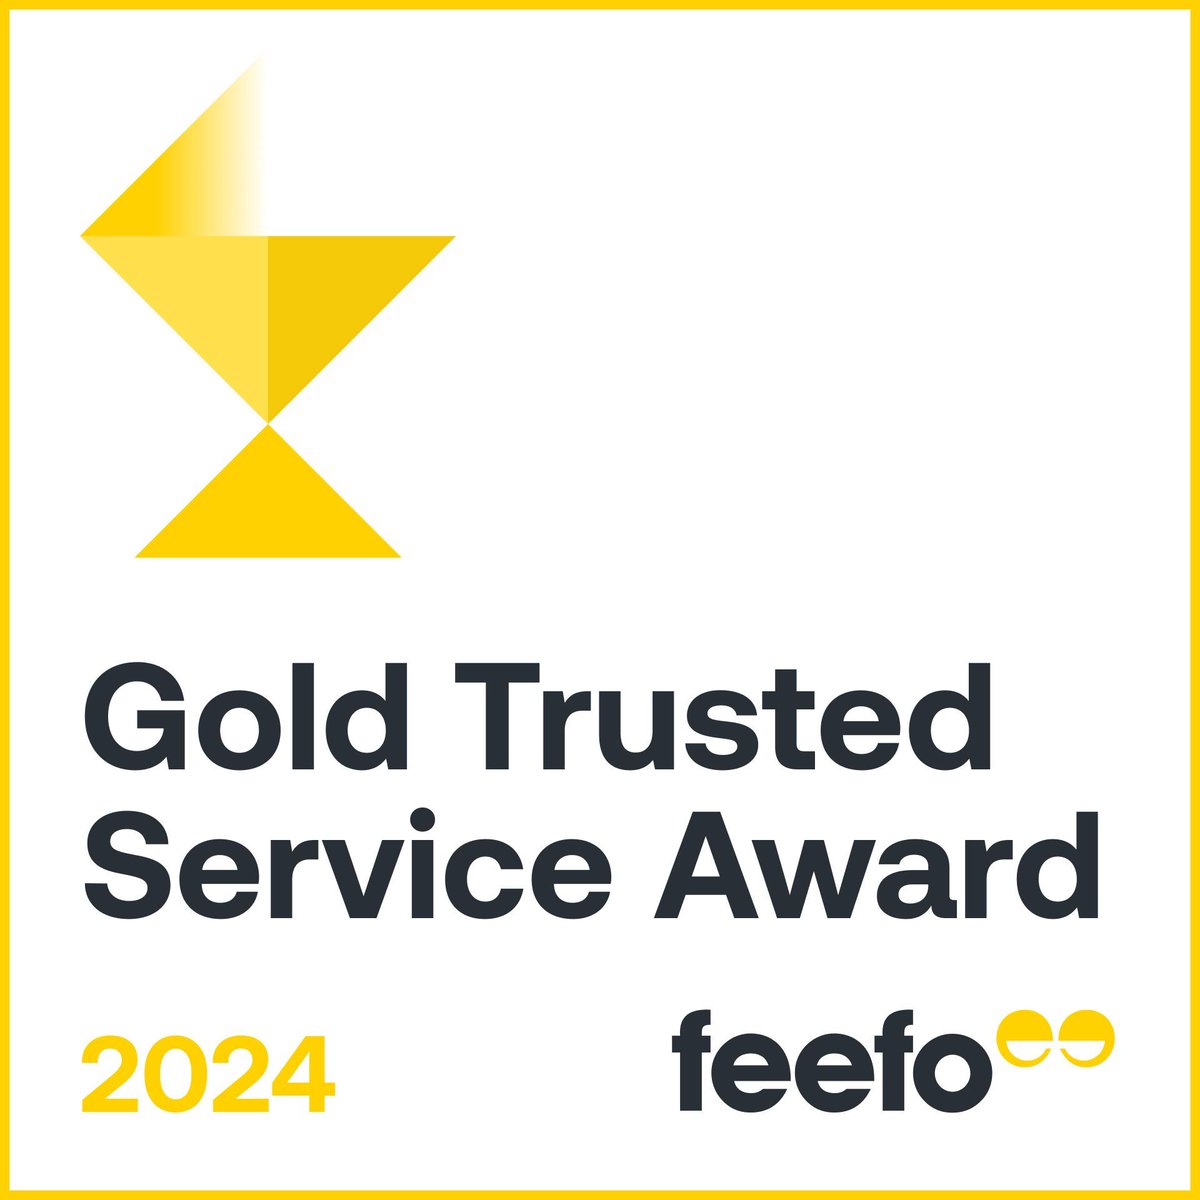 🌟 We’re thrilled to announce that we have won the @Feefo_Official 2024 Gold Trusted Service Award for excellence in customer service. We’d like to thank all our customers for sharing their feedback and ratings on Feefo!